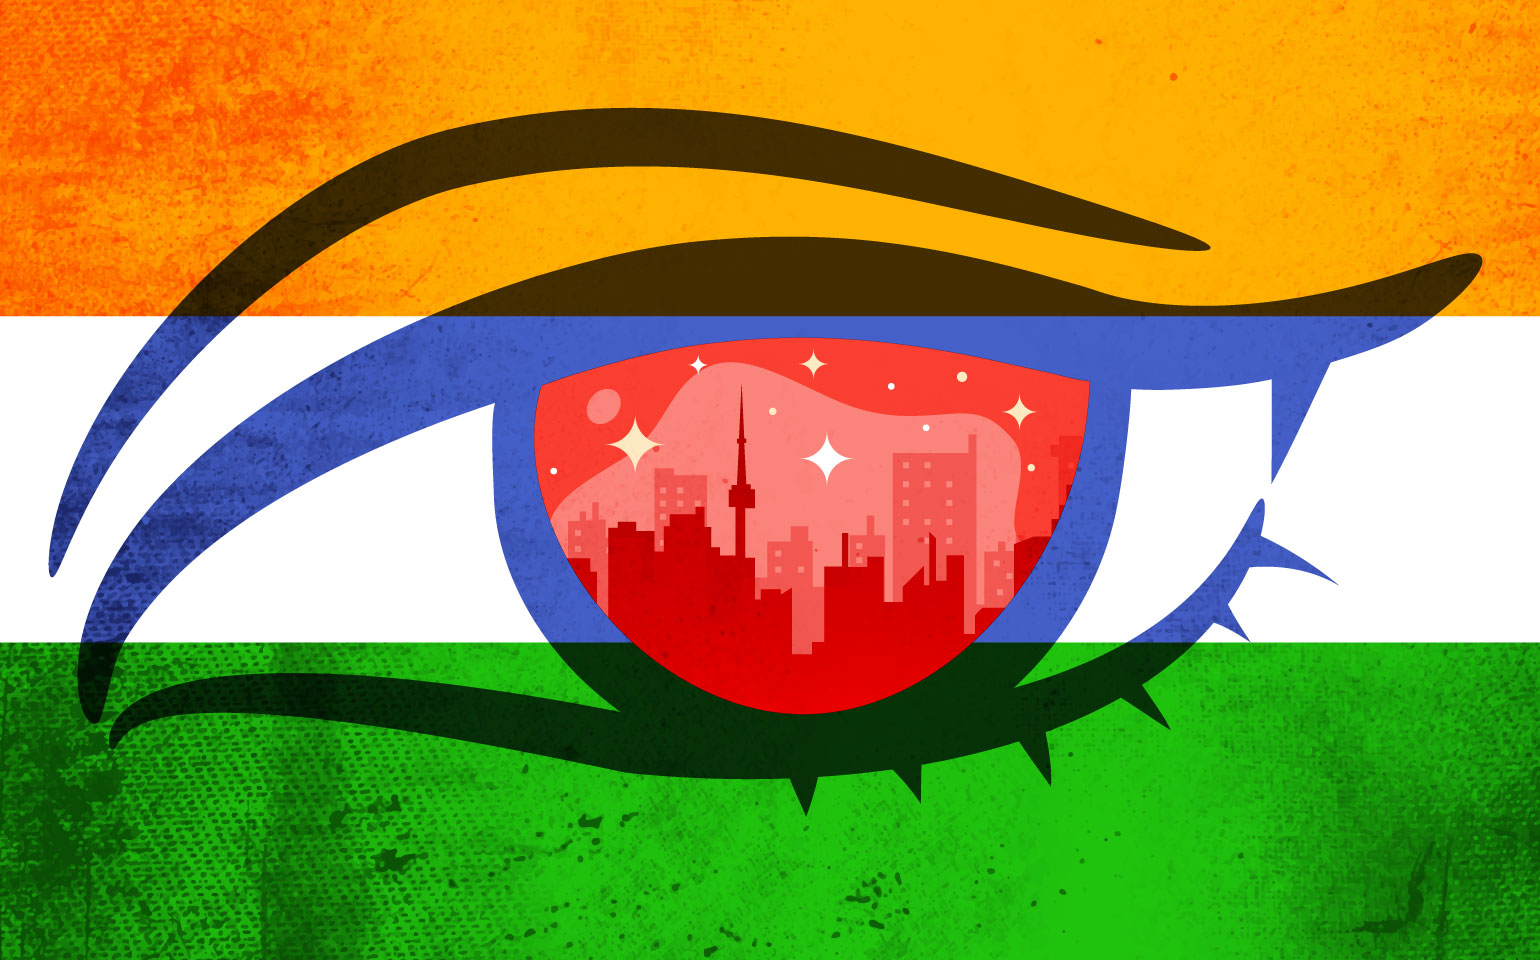 The skyline of Toronto, Canada, is seen within an eye that is comprised of the Indian flag.